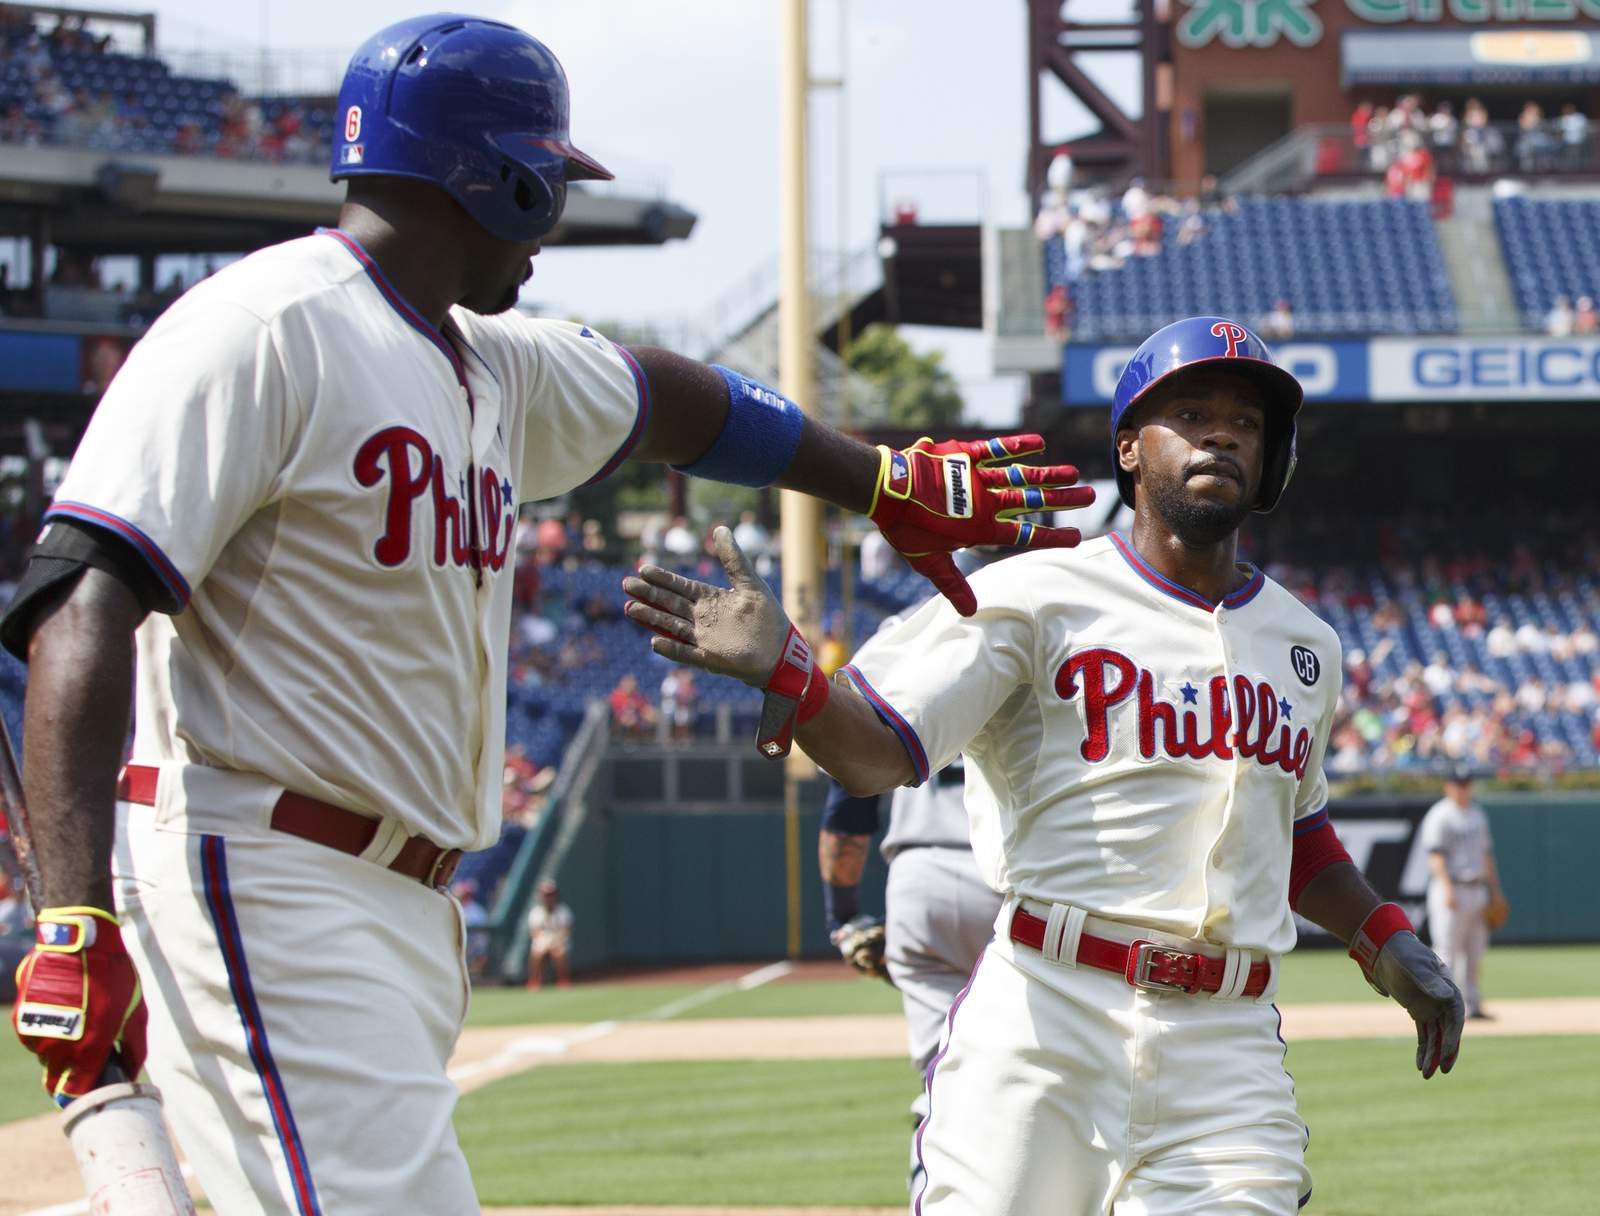 Jimmy Rollins reflects on decline of Black players in MLB